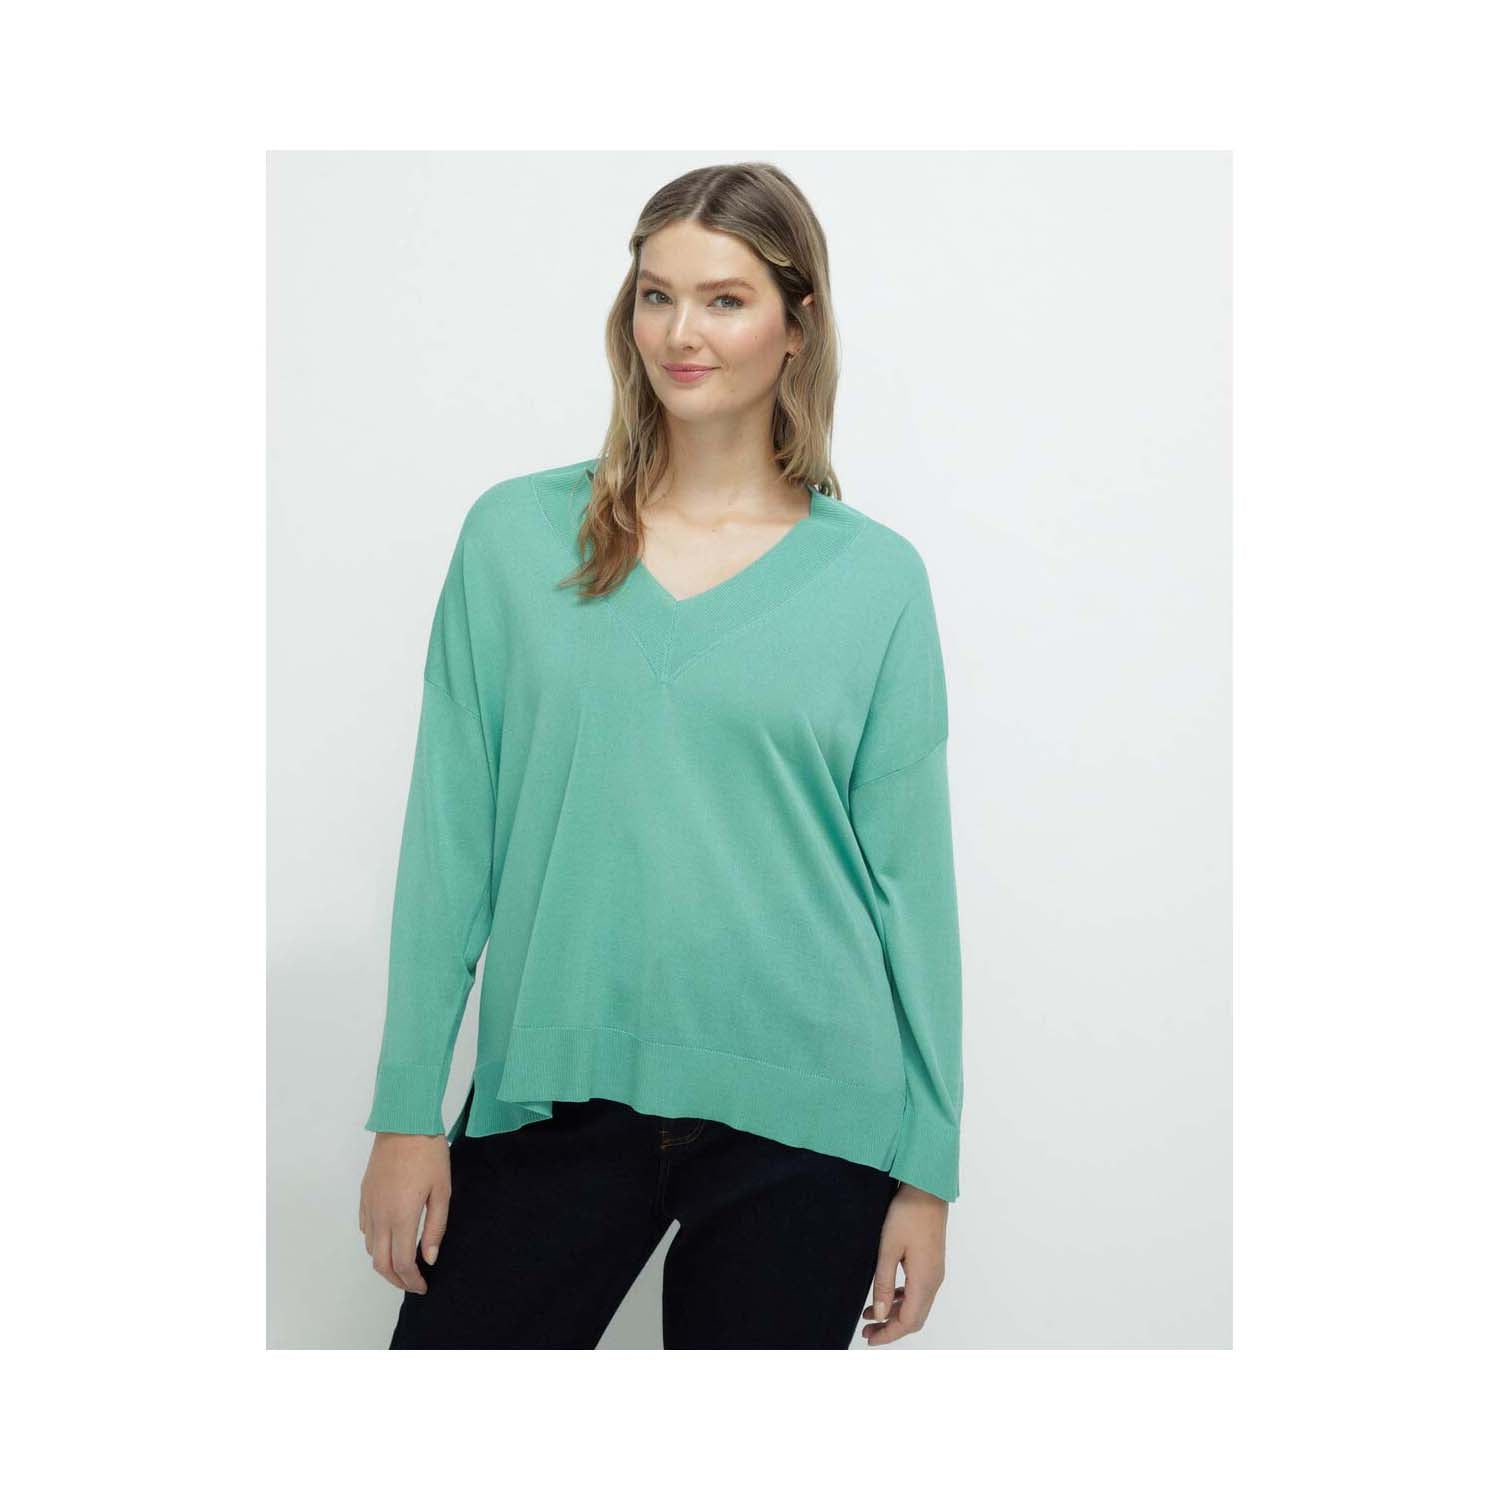 Couchel Long Sleeve V-Neck Sweater 3 Shaws Department Stores